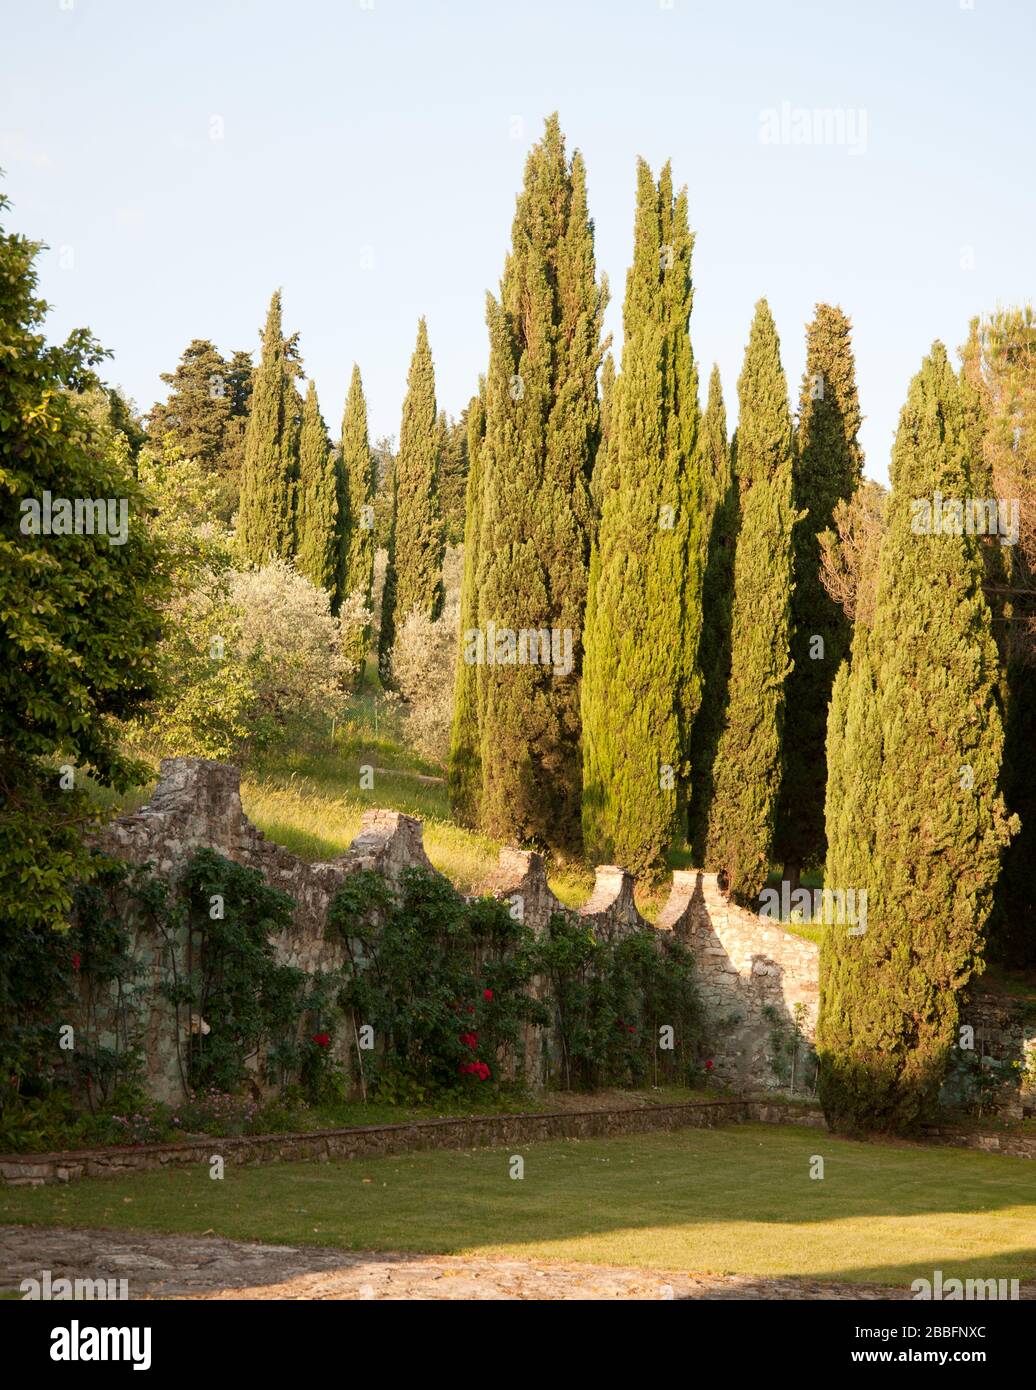 garden and historic villa in hilly Tuscan landscape, Tuscany Italy Stock Photo